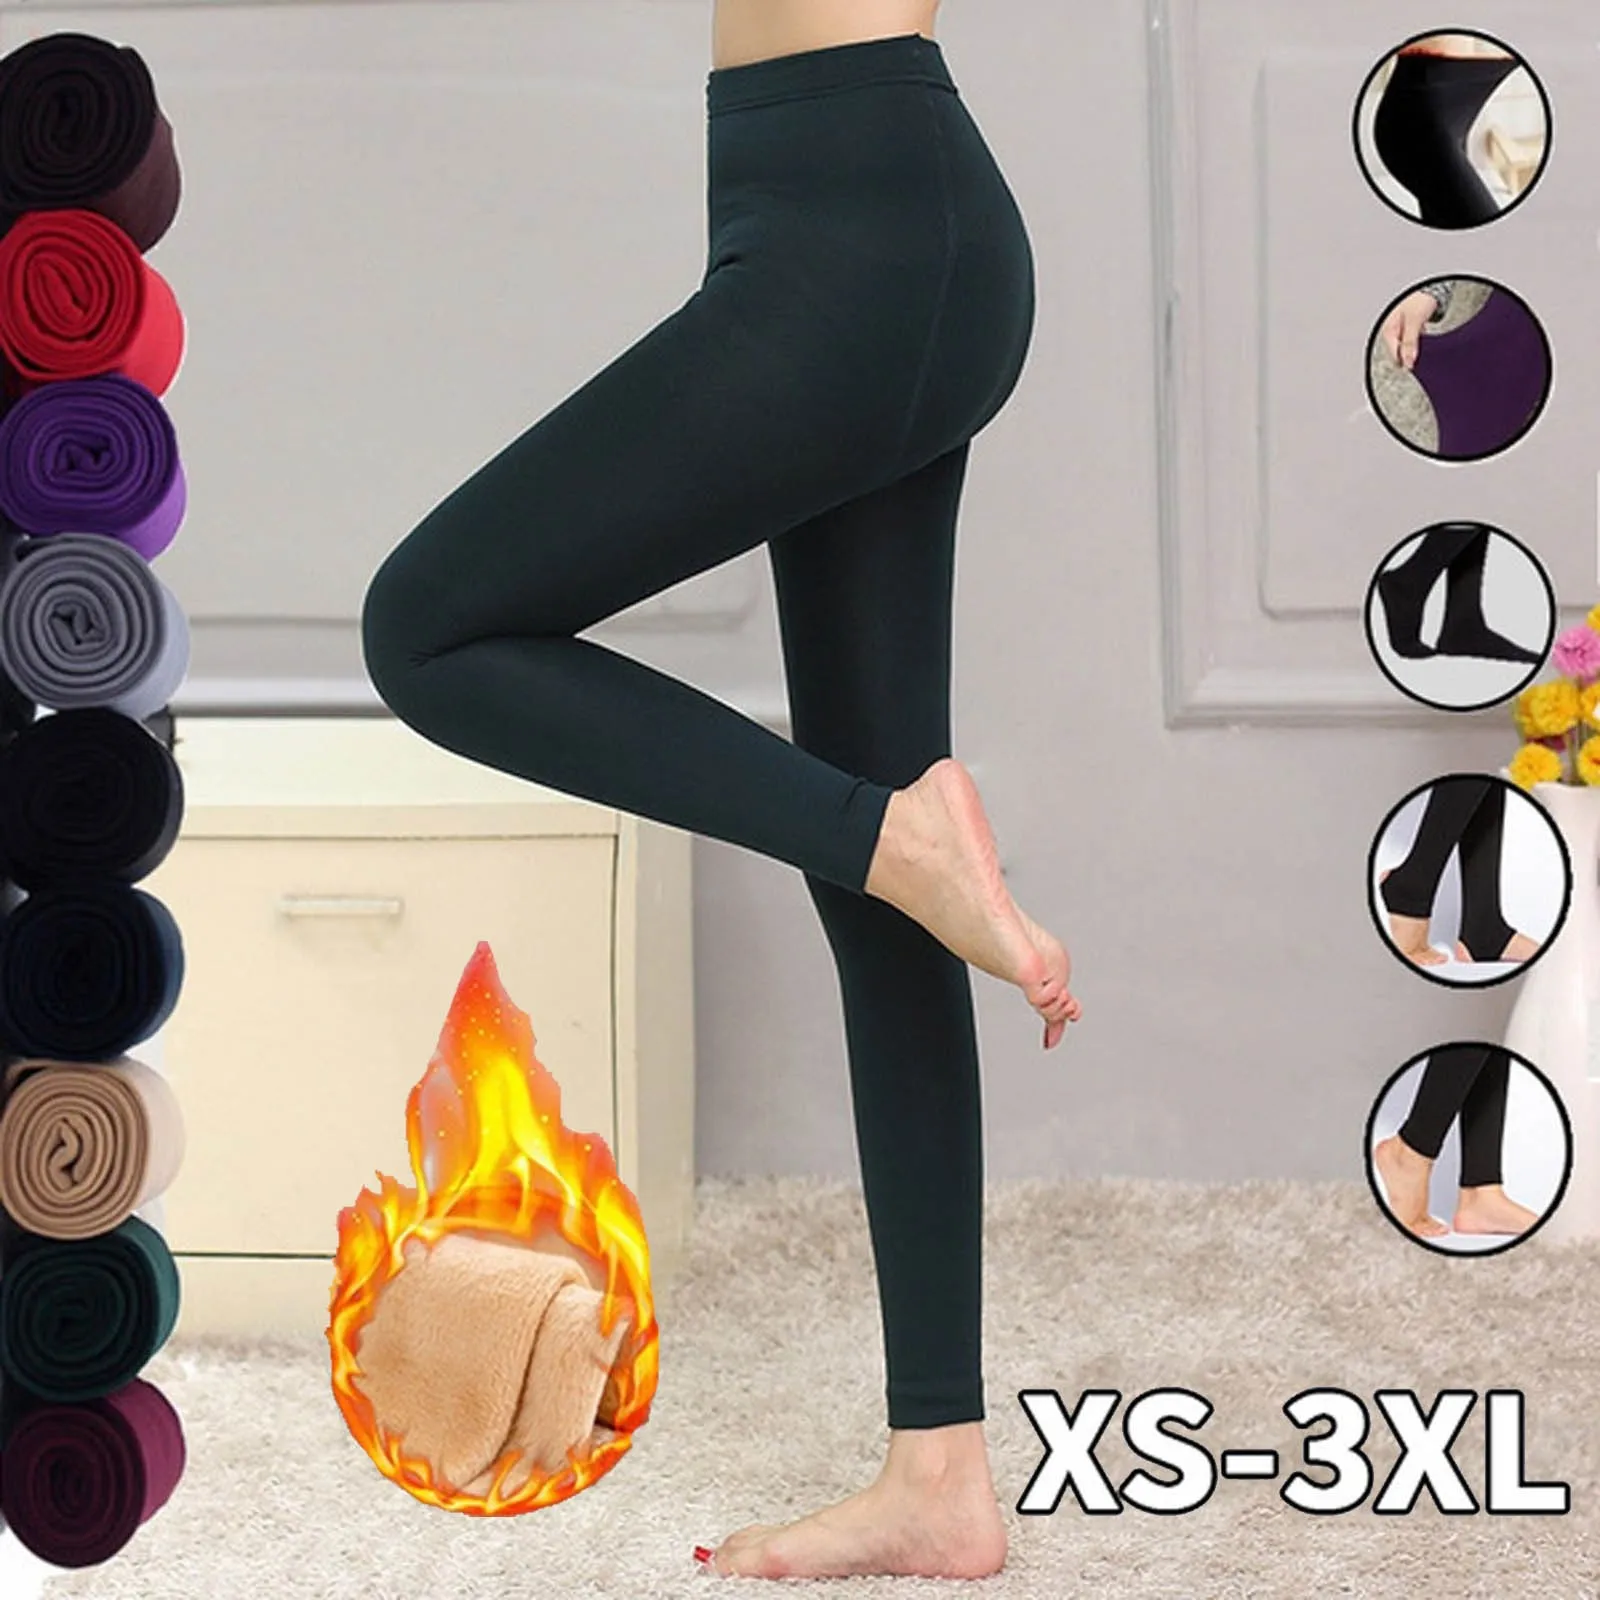 WOMENS LADIES WINTER FLEECE THERMAL WARM THICK FULL LENGTH LEGGINGS ALL COLOURS 